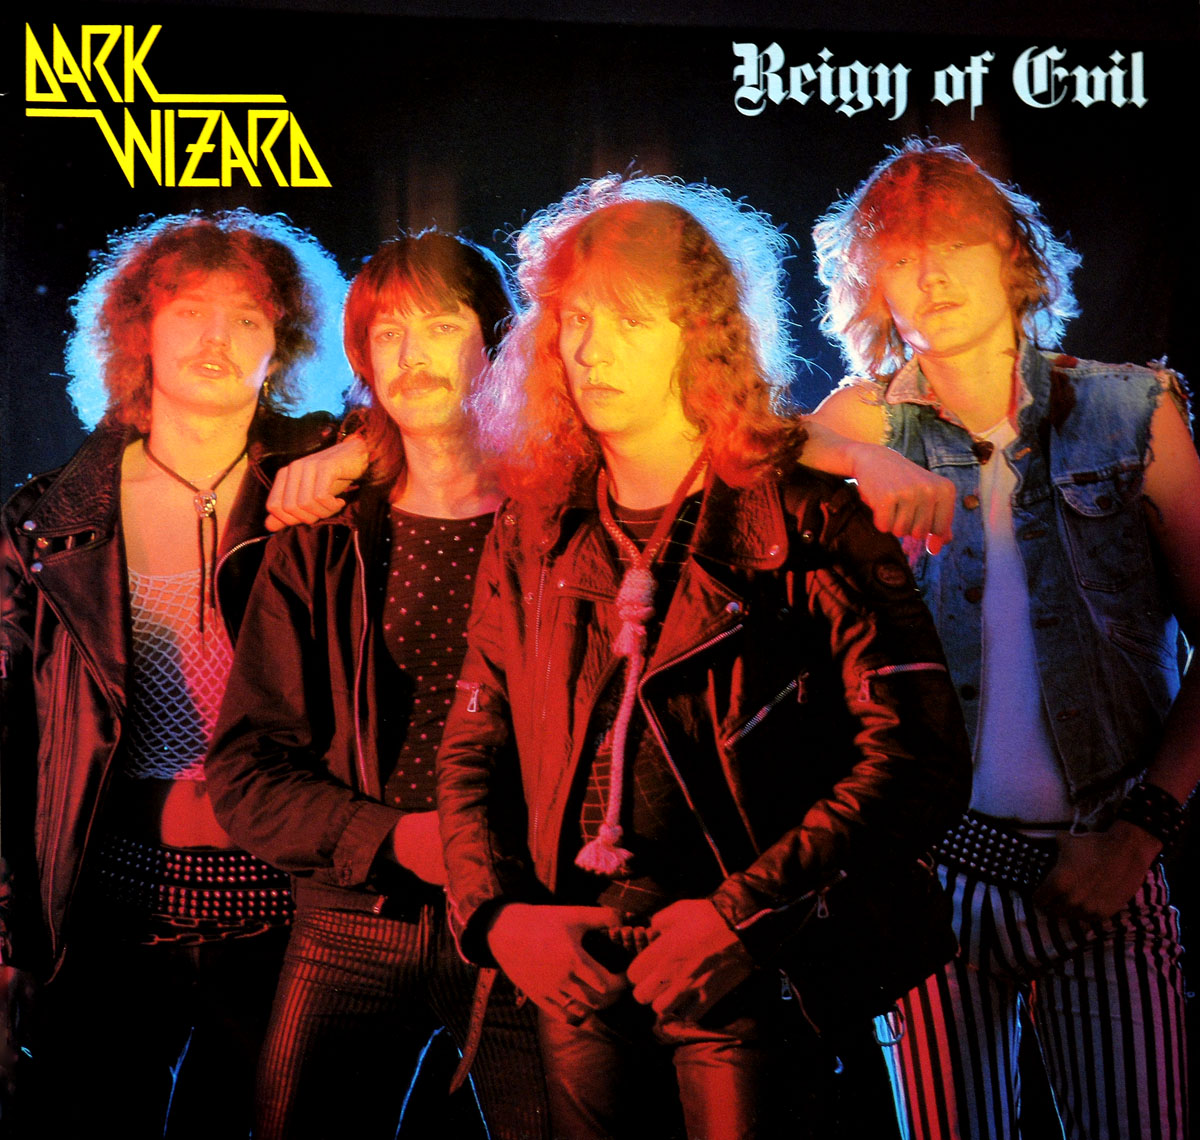 large album front cover photo of: DARK WIZARD Reign of Evil NETHERLANDS 